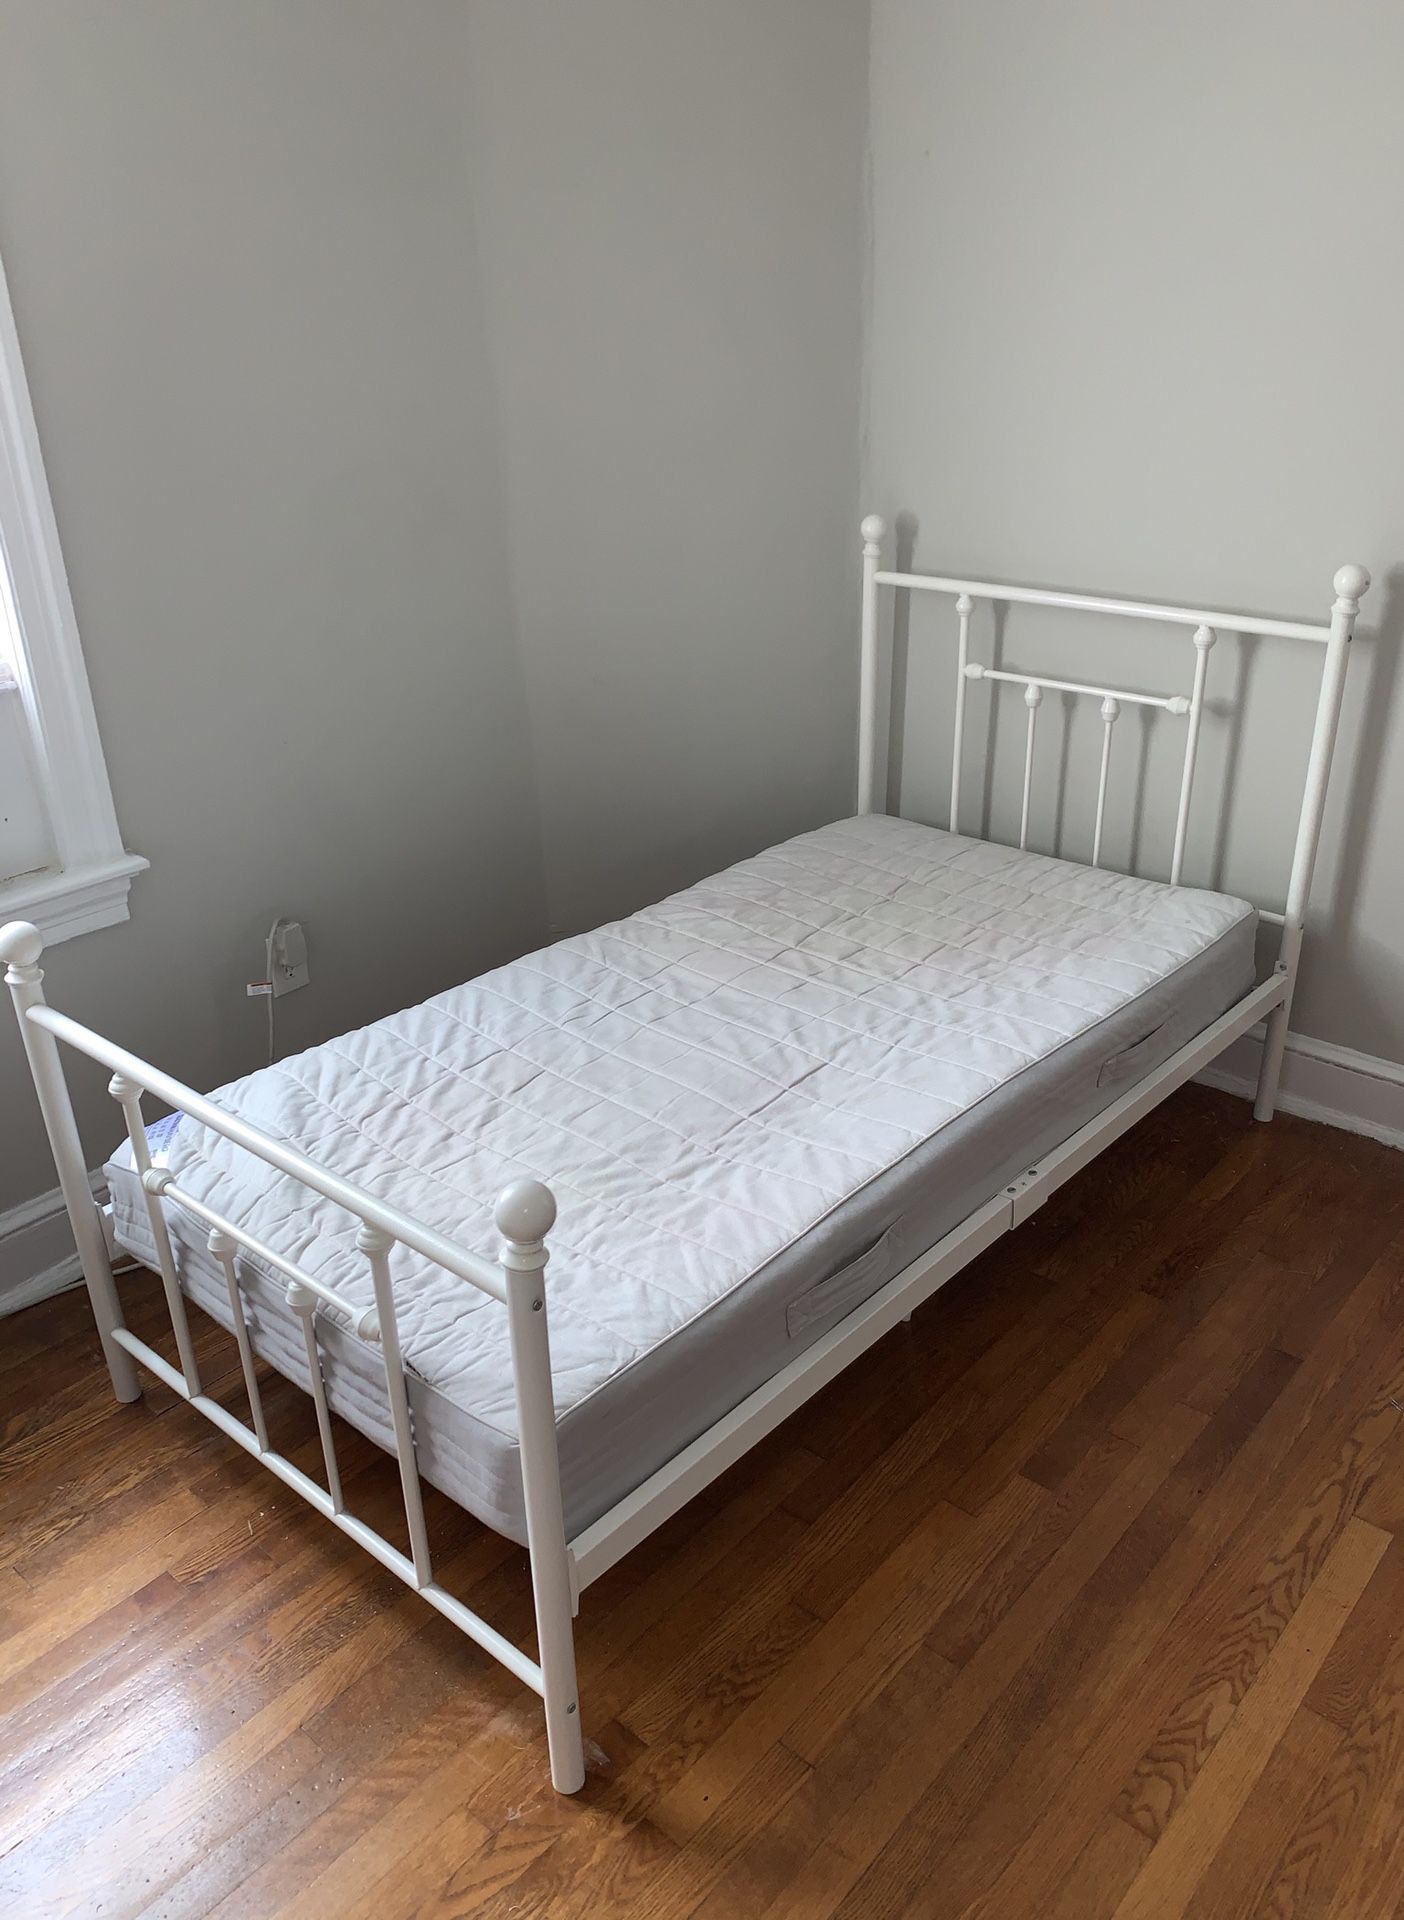 White twin size bed frame, mattress included!